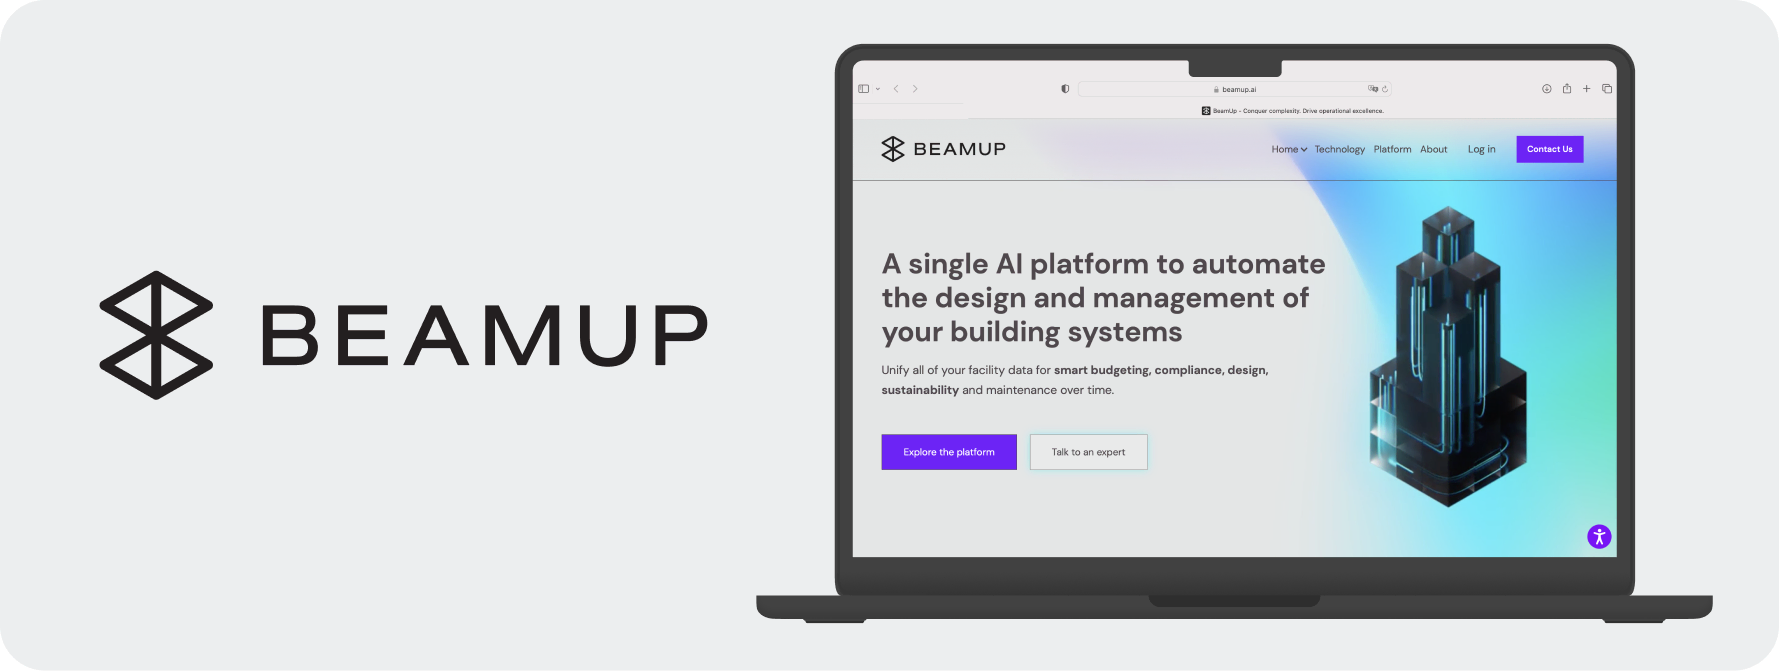 beamUp commercial real estate proptech